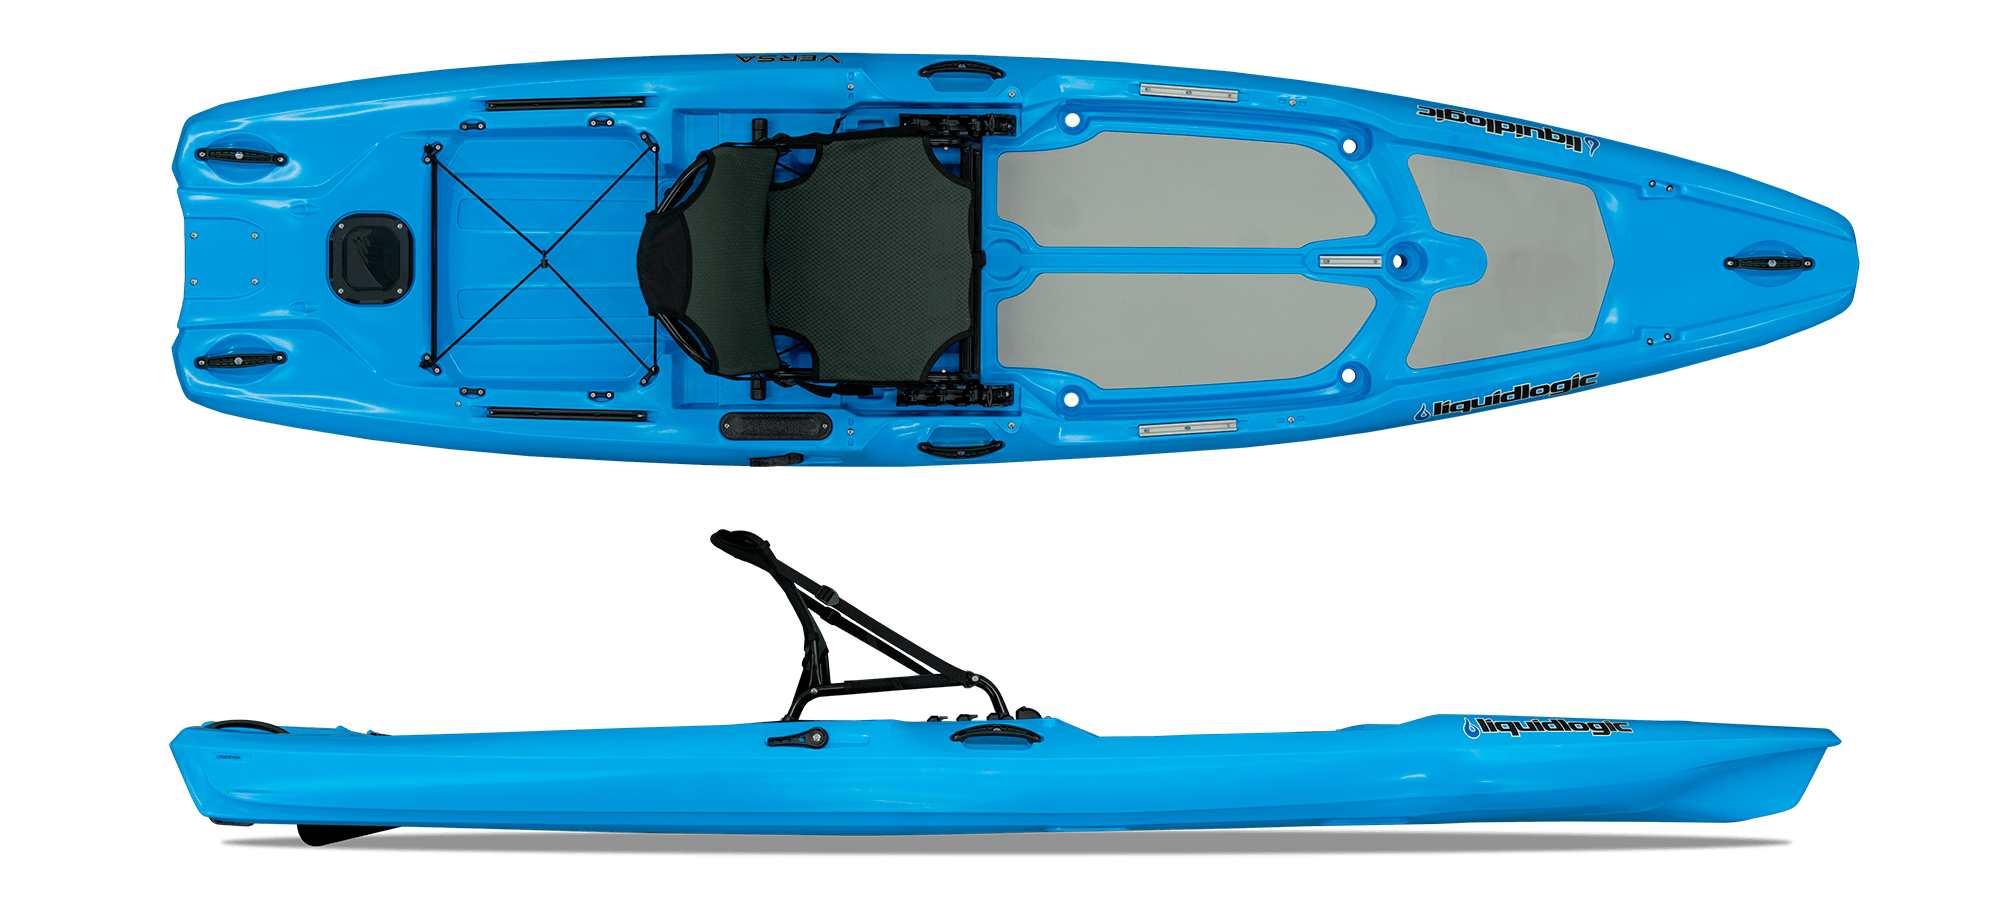 Exciting 2 person fishing kayak sale For Thrill And Adventure 